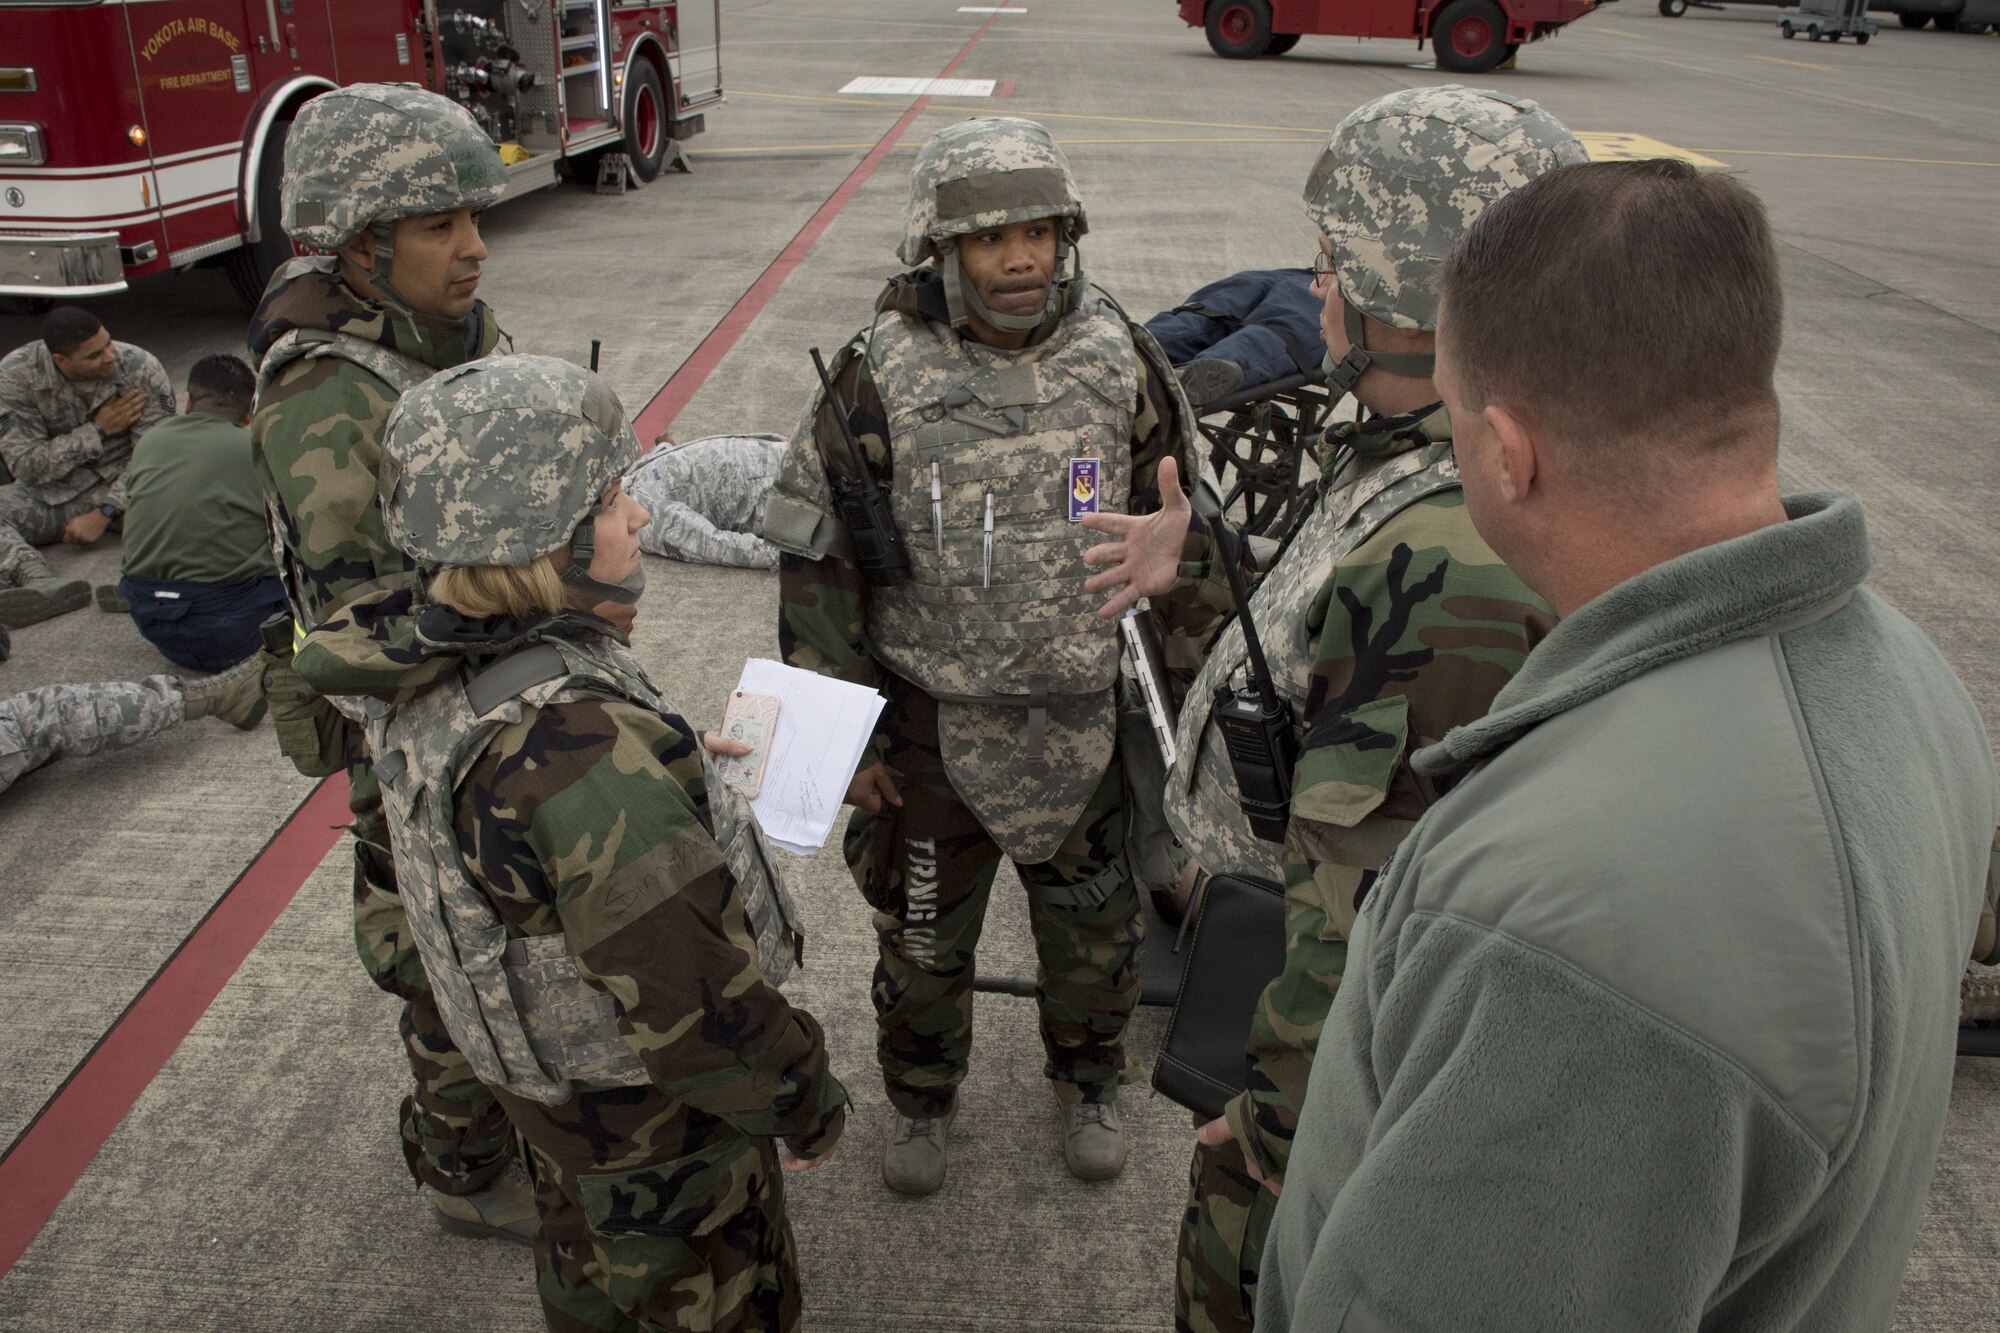 Members of the Wing Inspection Team discuss the outcome of the emergency response of a simulated missile attack on the flight line during exercise Beverly Morning 17-08 in conjunction with exercise Vigilant Ace 18, Dec. 4, 2017, at Yokota Air Base, Japan.